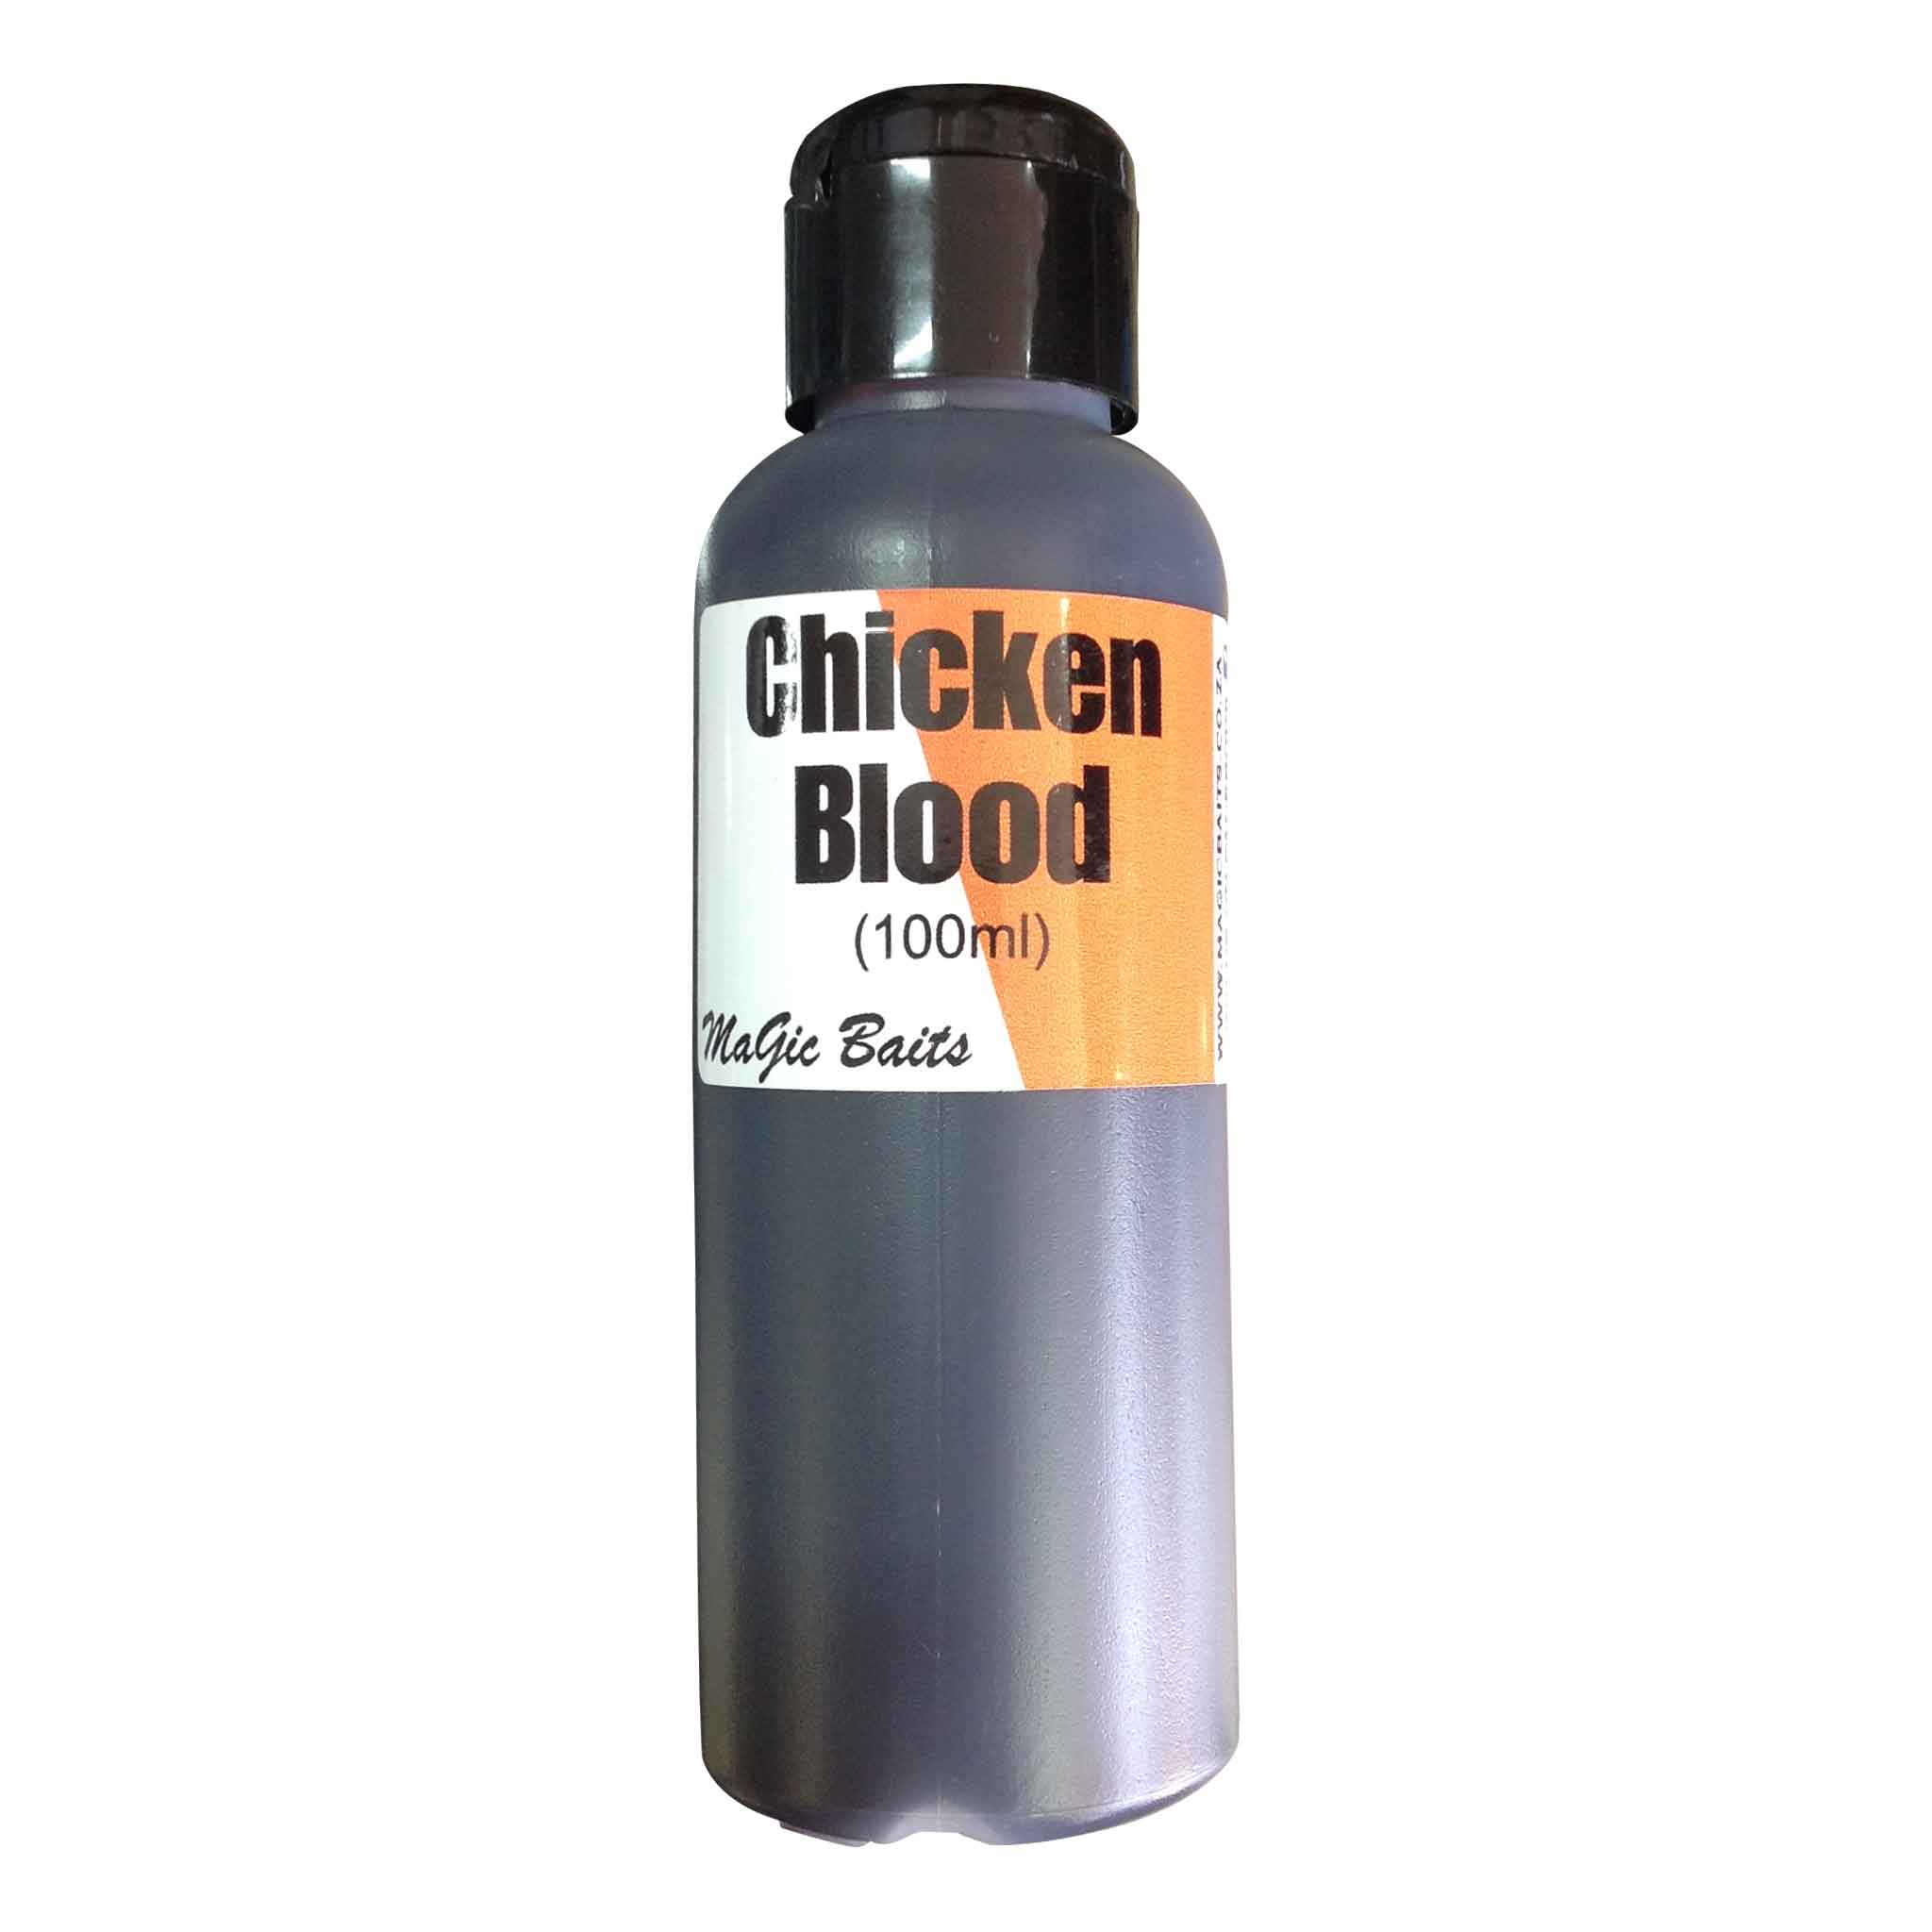 MAGIC BAITS BOLDIPS CHICKEN BLOOD 100ML - Moosa's Angling And Outdoor